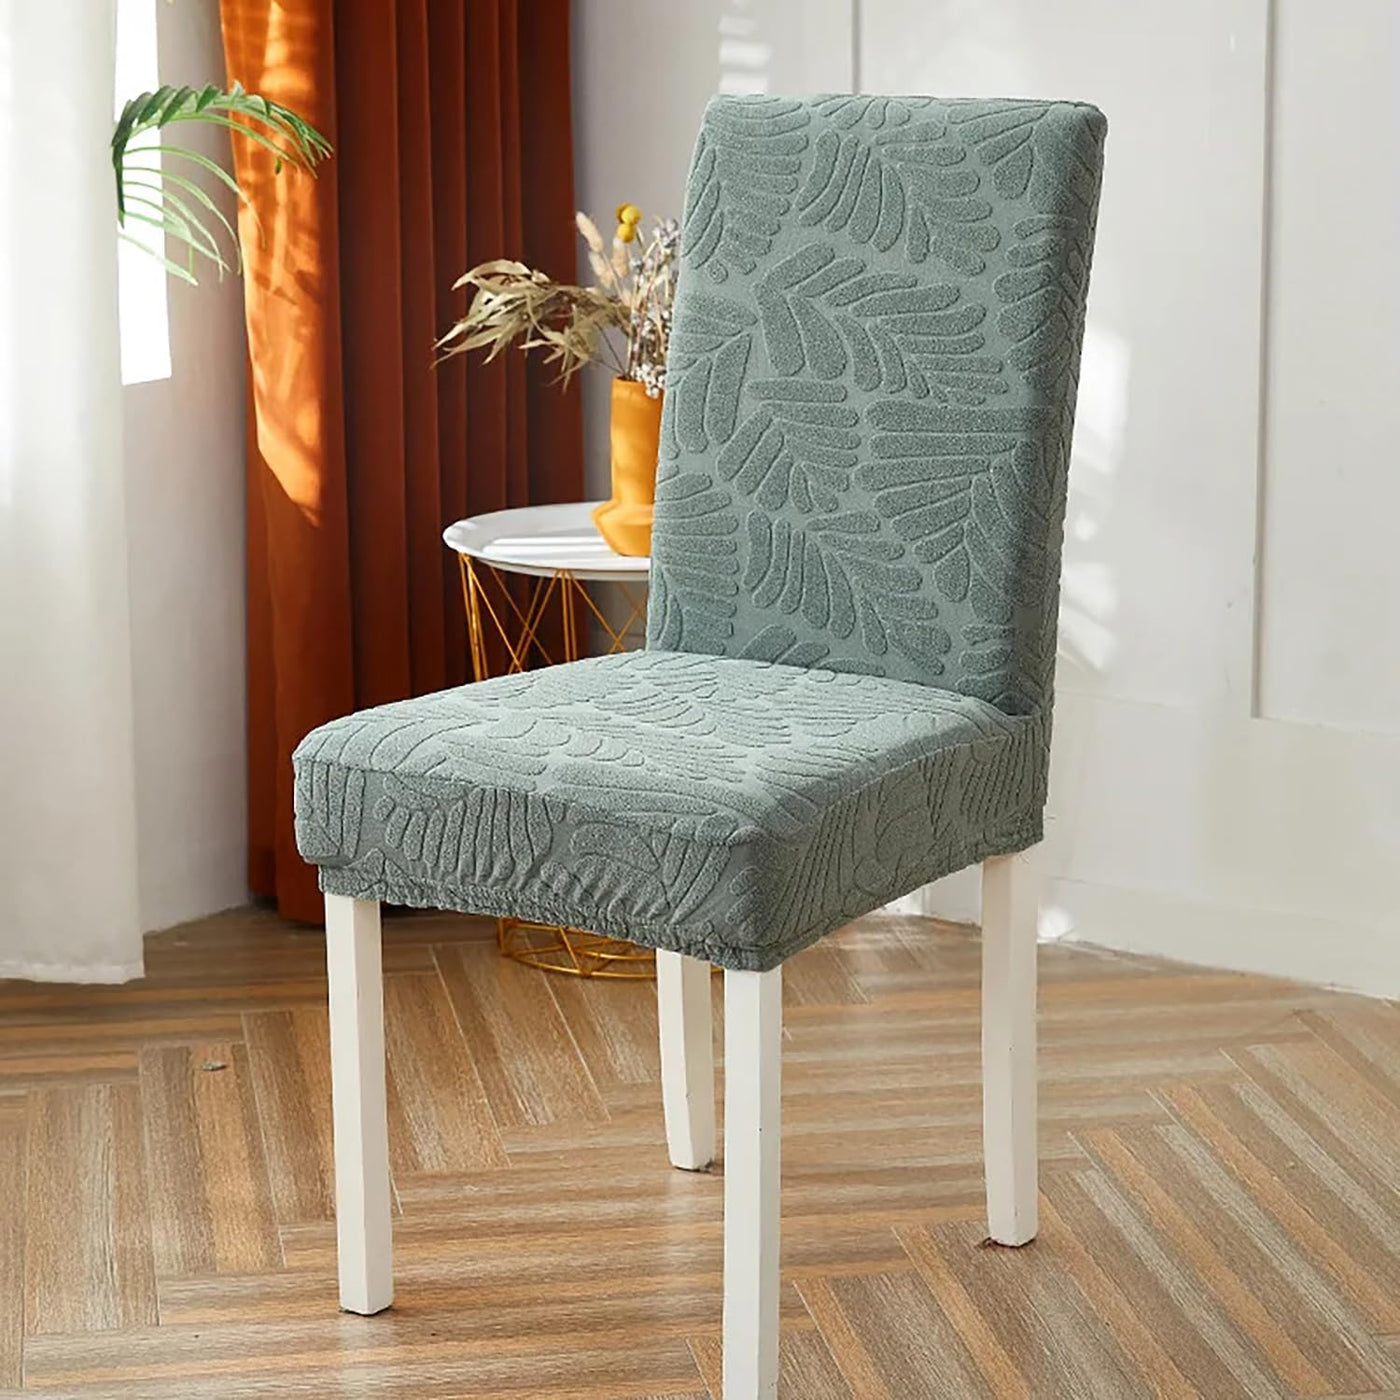 Jacquard Leaf Chair Cover-Pastel Green